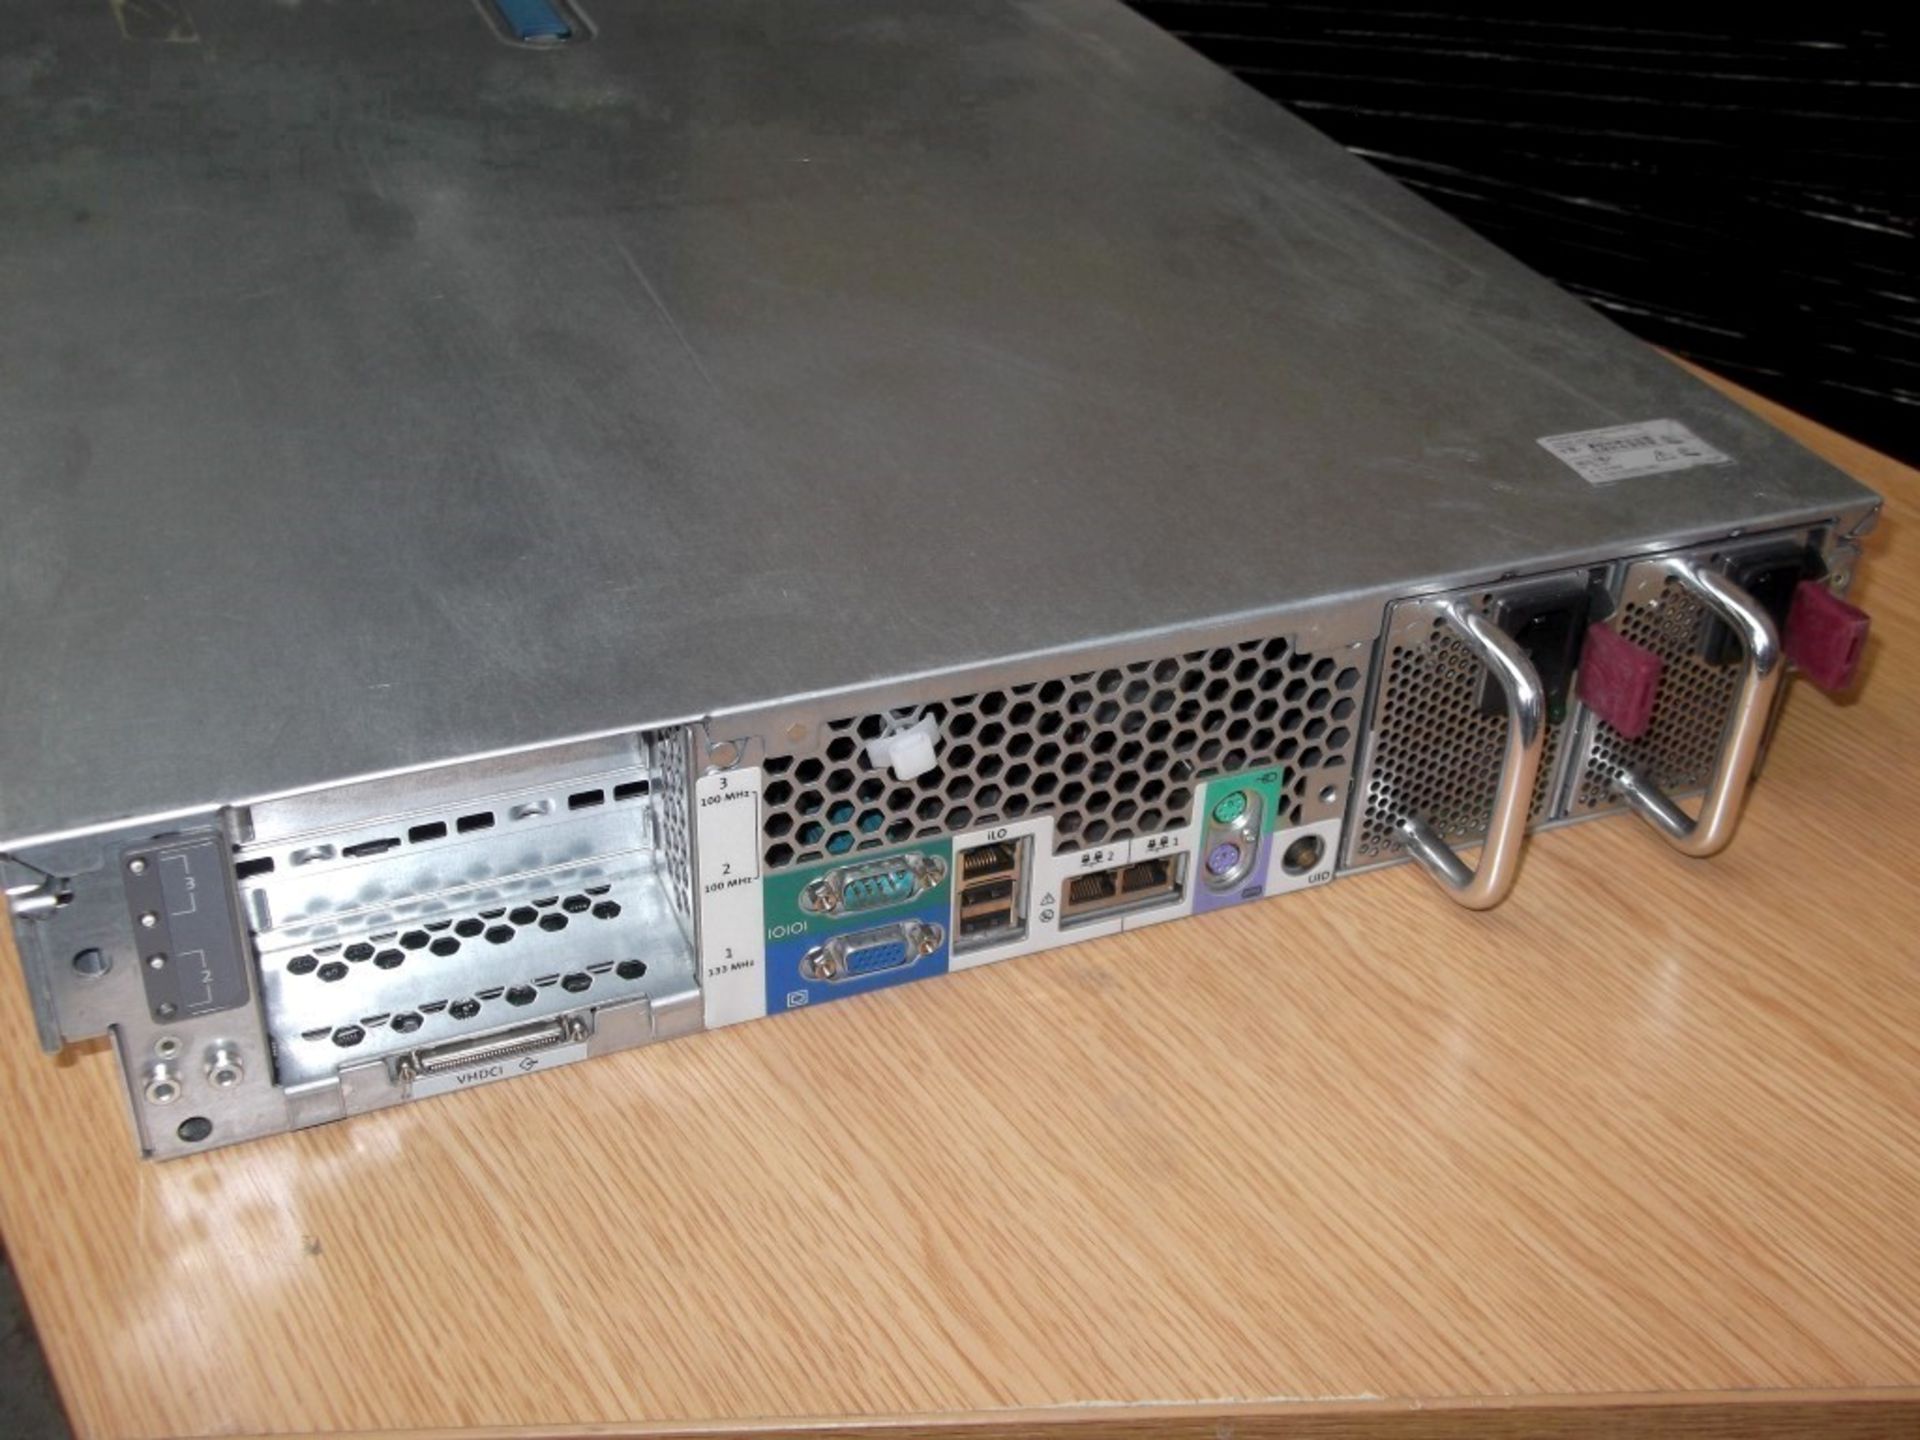 1 x 1 x HP ProLiant DL380 Rackmount File Server - G3 Xeon - 2GB - Recently Removed From A Working - Image 5 of 5